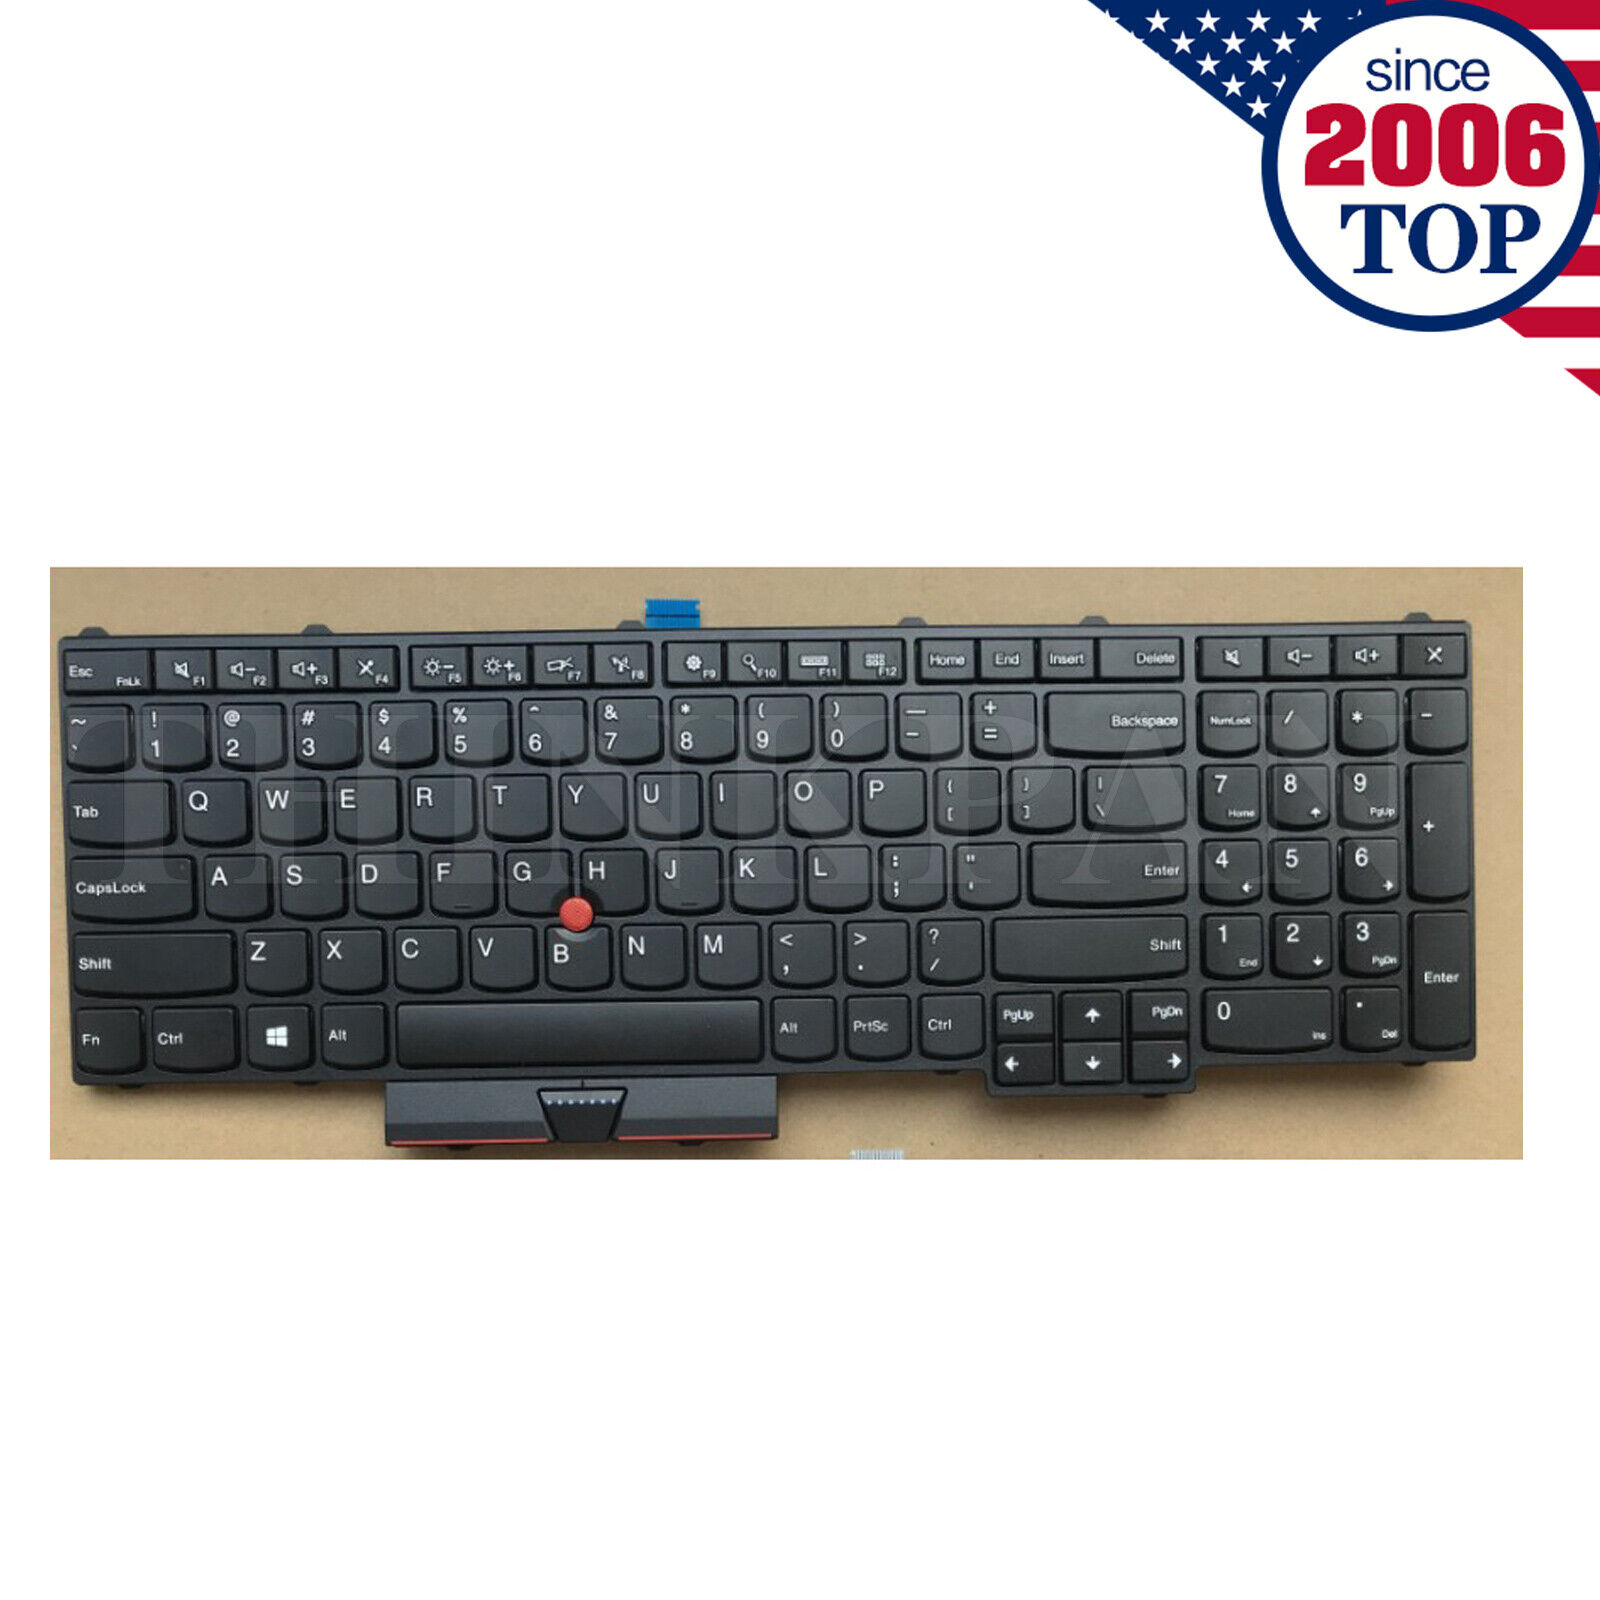 US Keyboard No Backlit for Lenovo Thinkpad IBM P50 P51 P70 (Not compatible P50s)